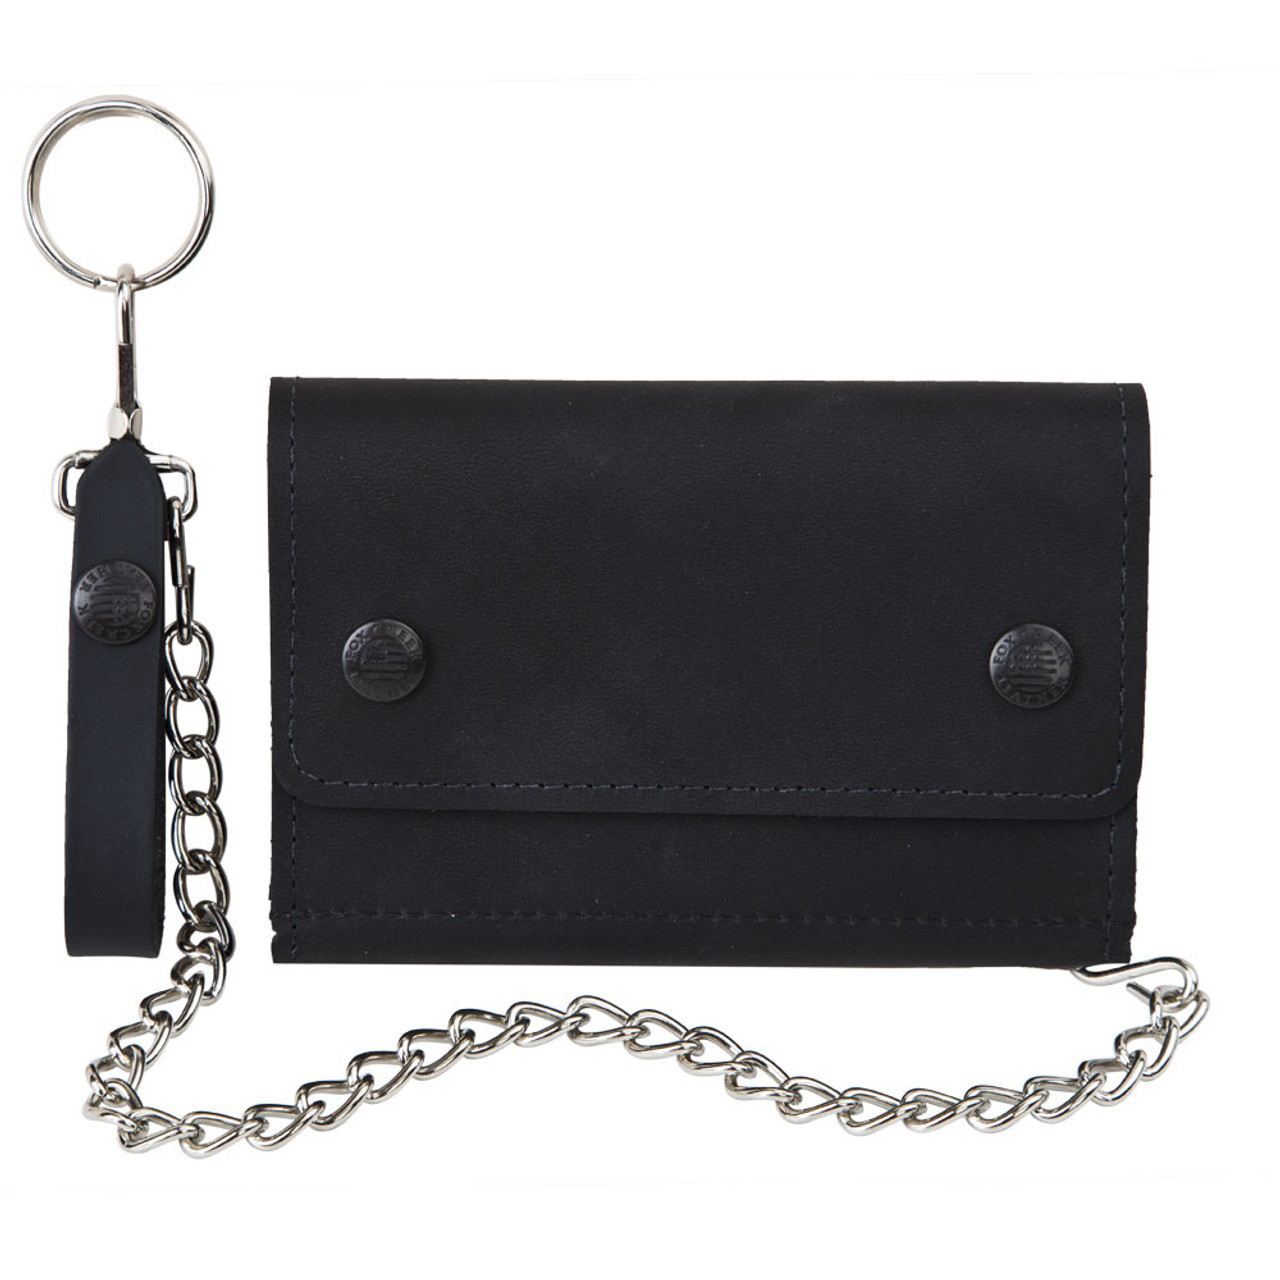 Tri-fold Trucker Wallet with Chain - The Bikers' Den